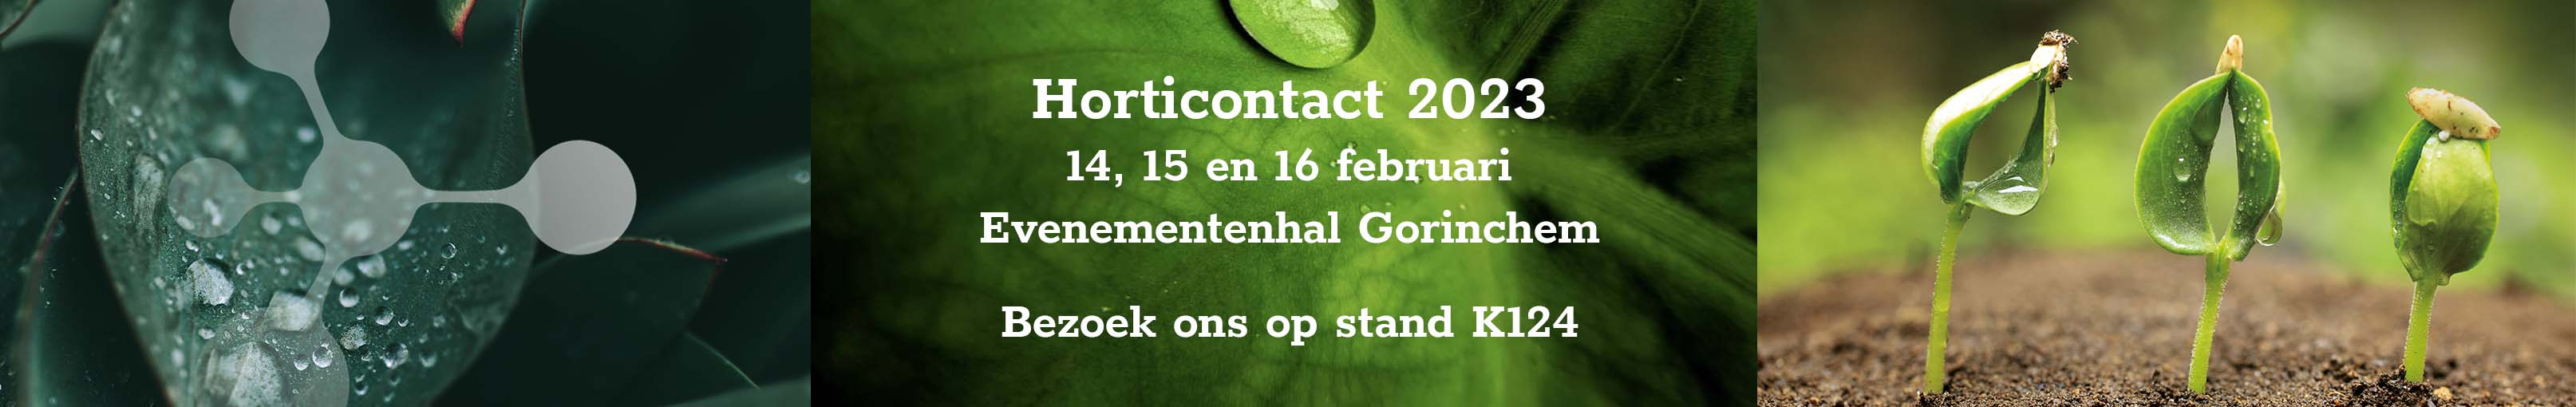 HortiContact